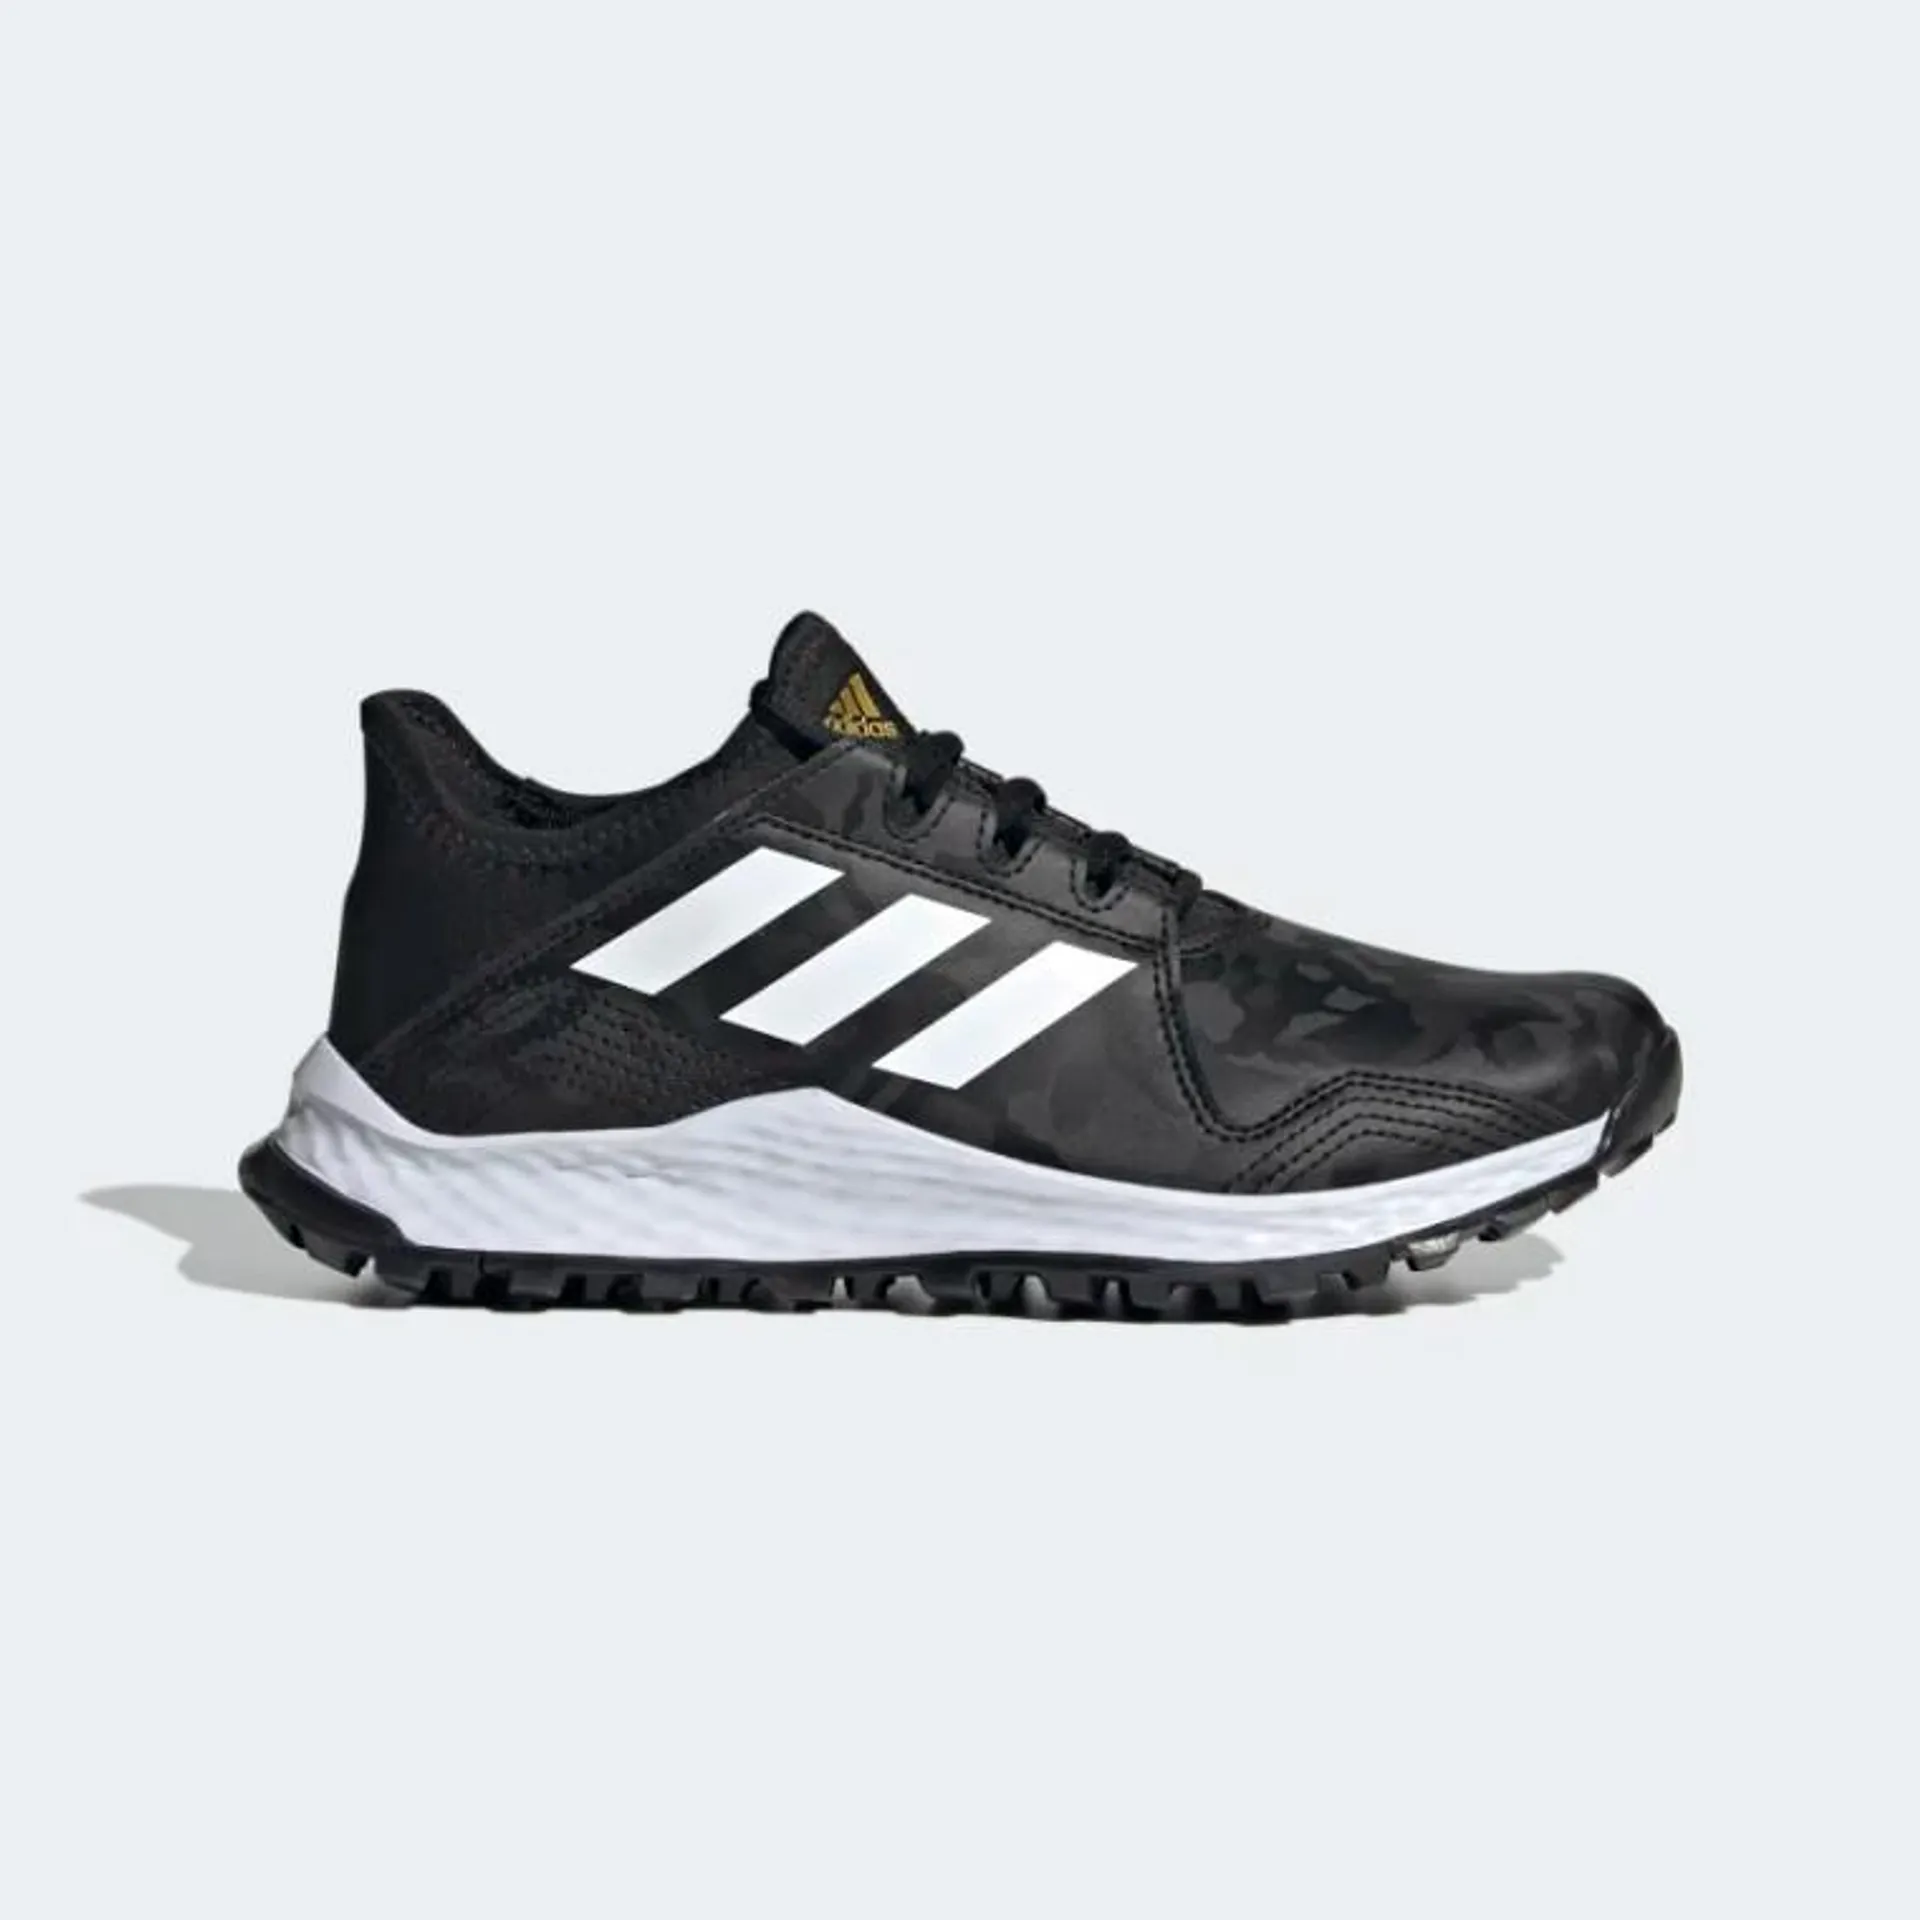 Adidas Youth Youngstar Turf Shoes Black/Gold